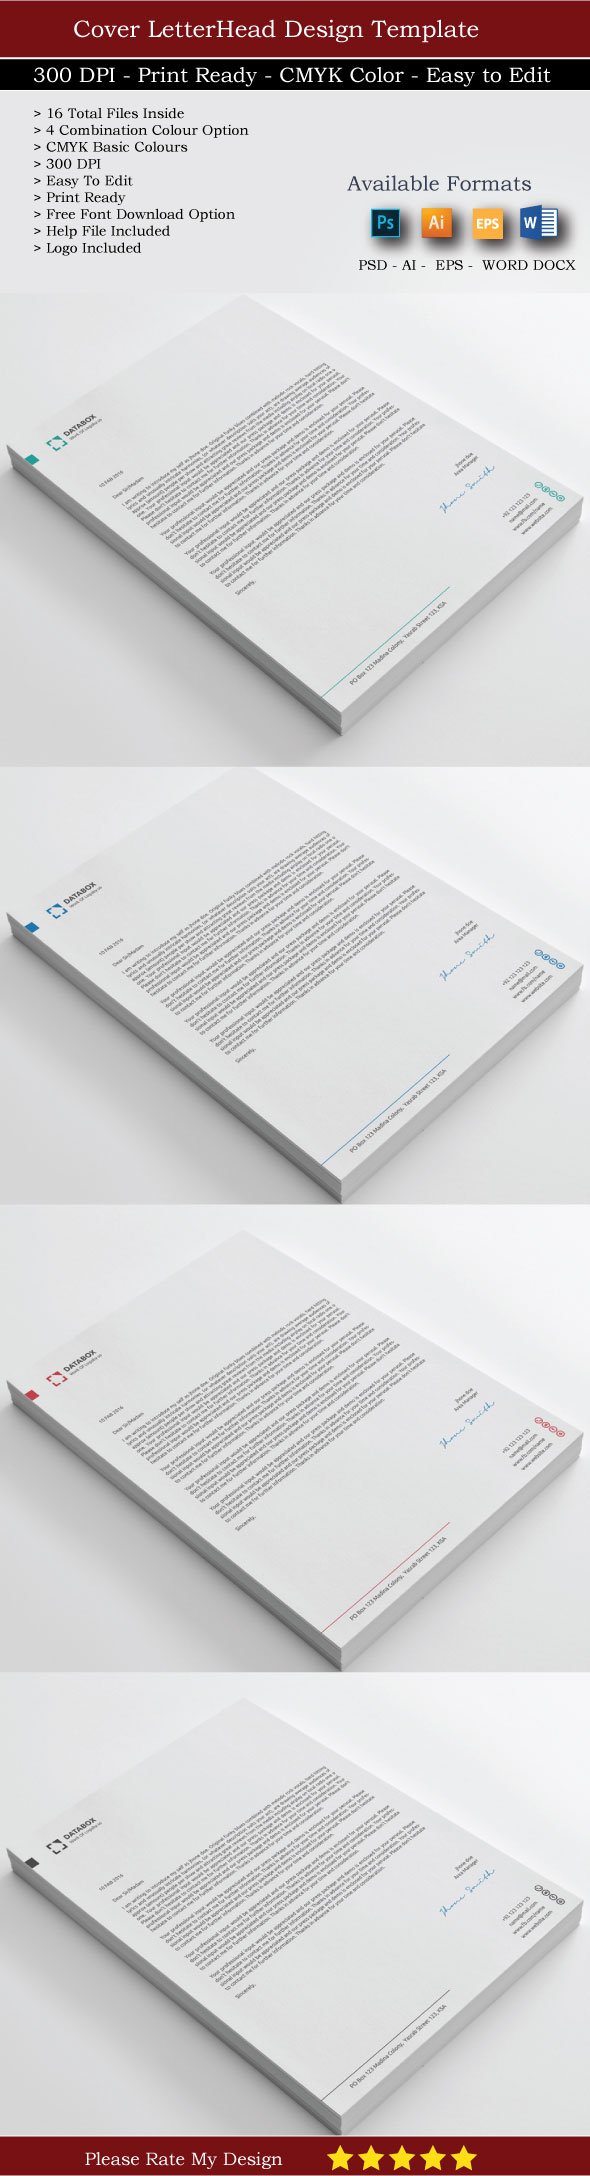 Data box Letterheads with MS Word preview image.